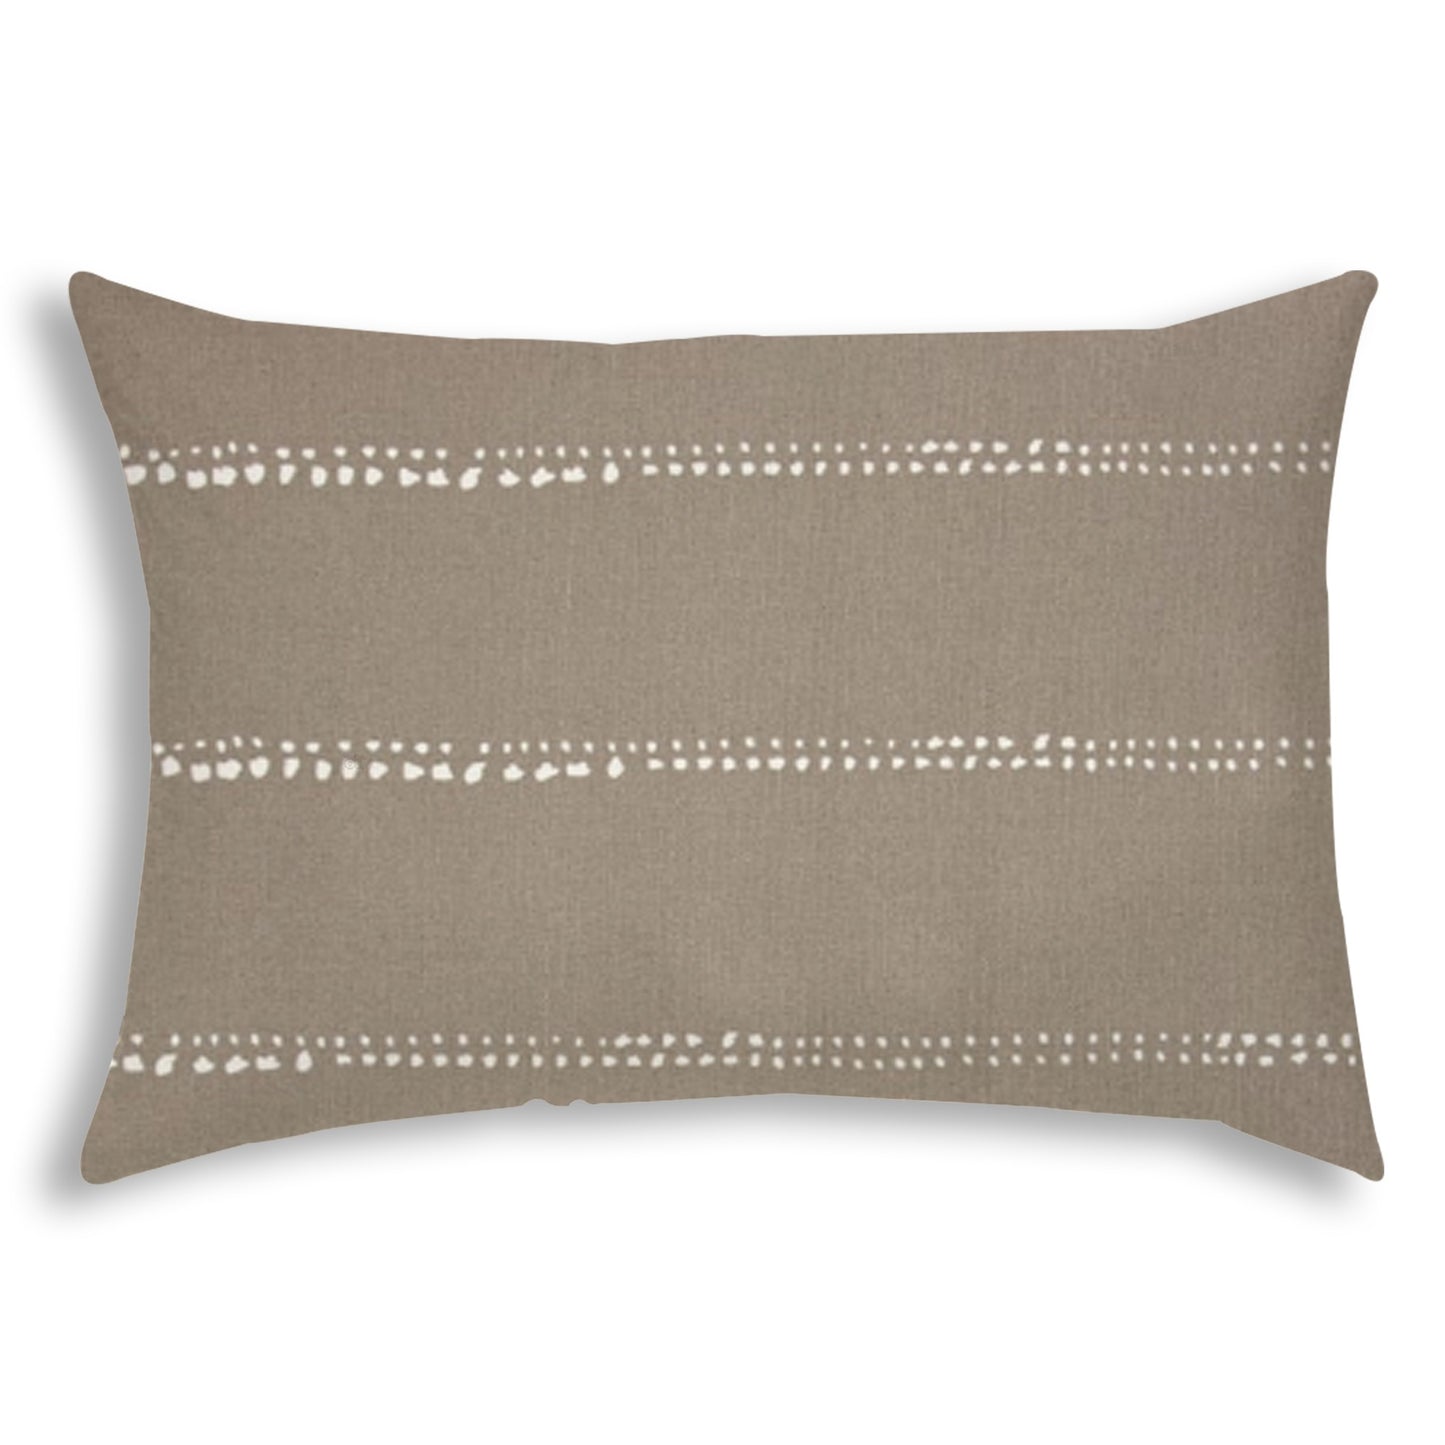 14" X 20" Taupe And White Blown Seam Polka Dots Lumbar Indoor Outdoor Pillow